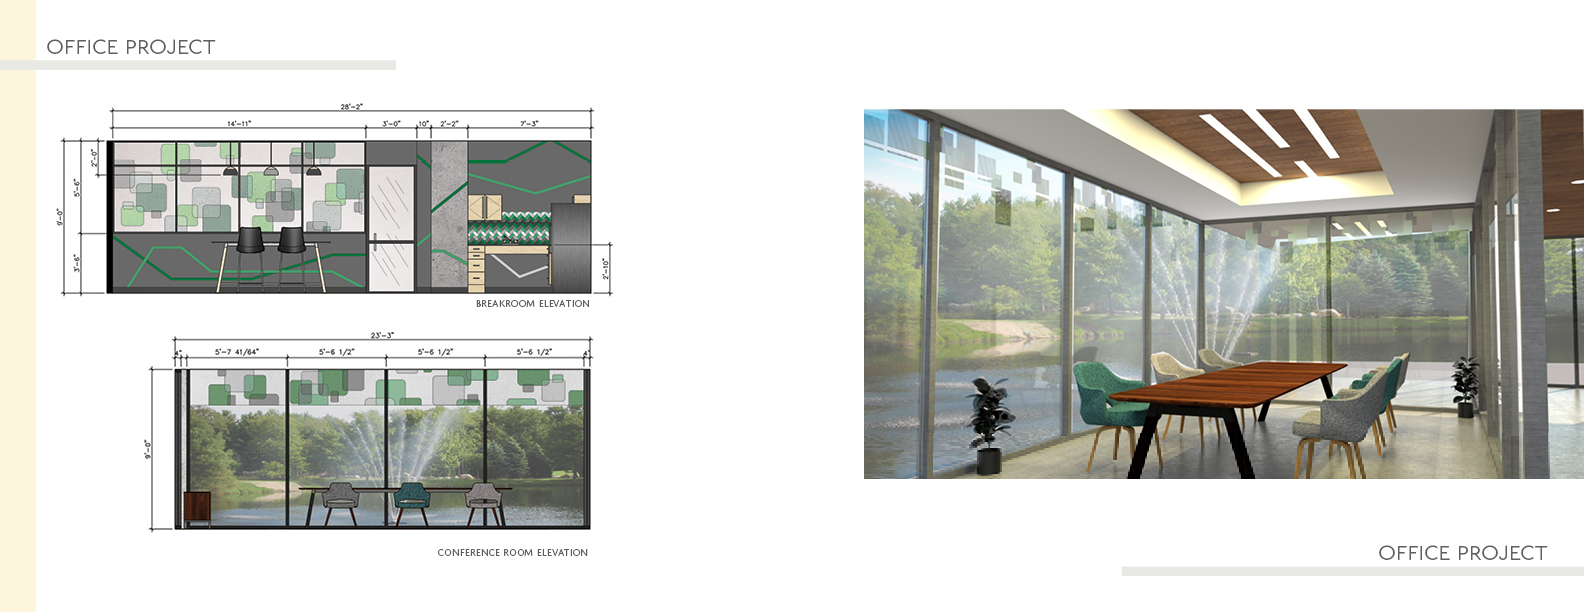 Office project - Breakroom and confernce room elevation designs